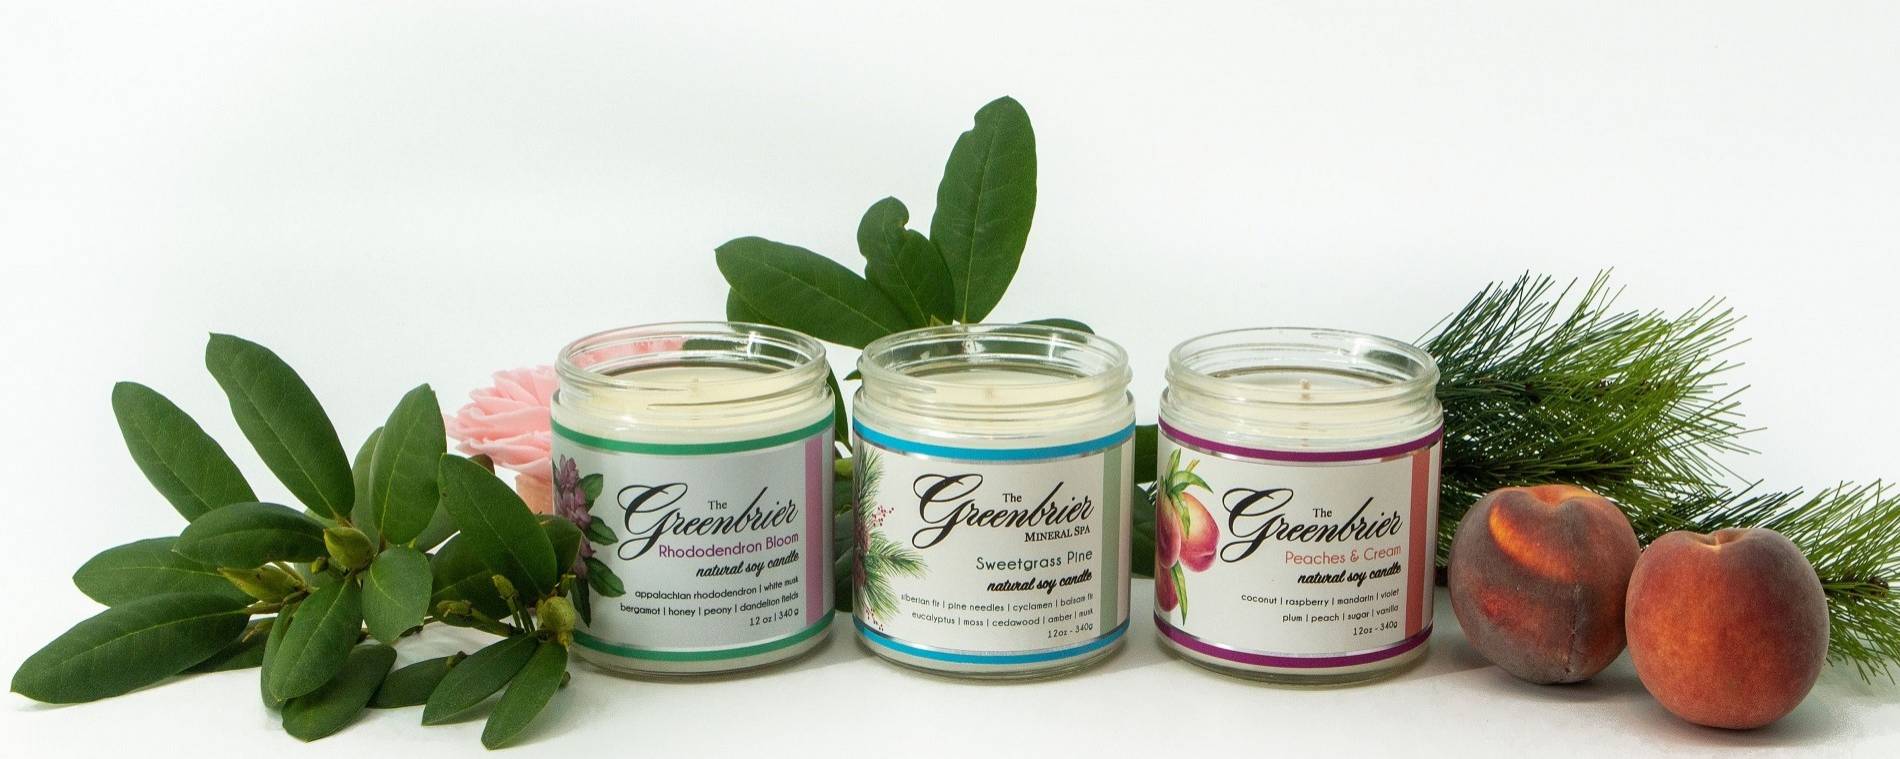 https://store.greenbrier.com/the-greenbrier-bath-collection/bath-body-gift-sets?product_list_limit=24